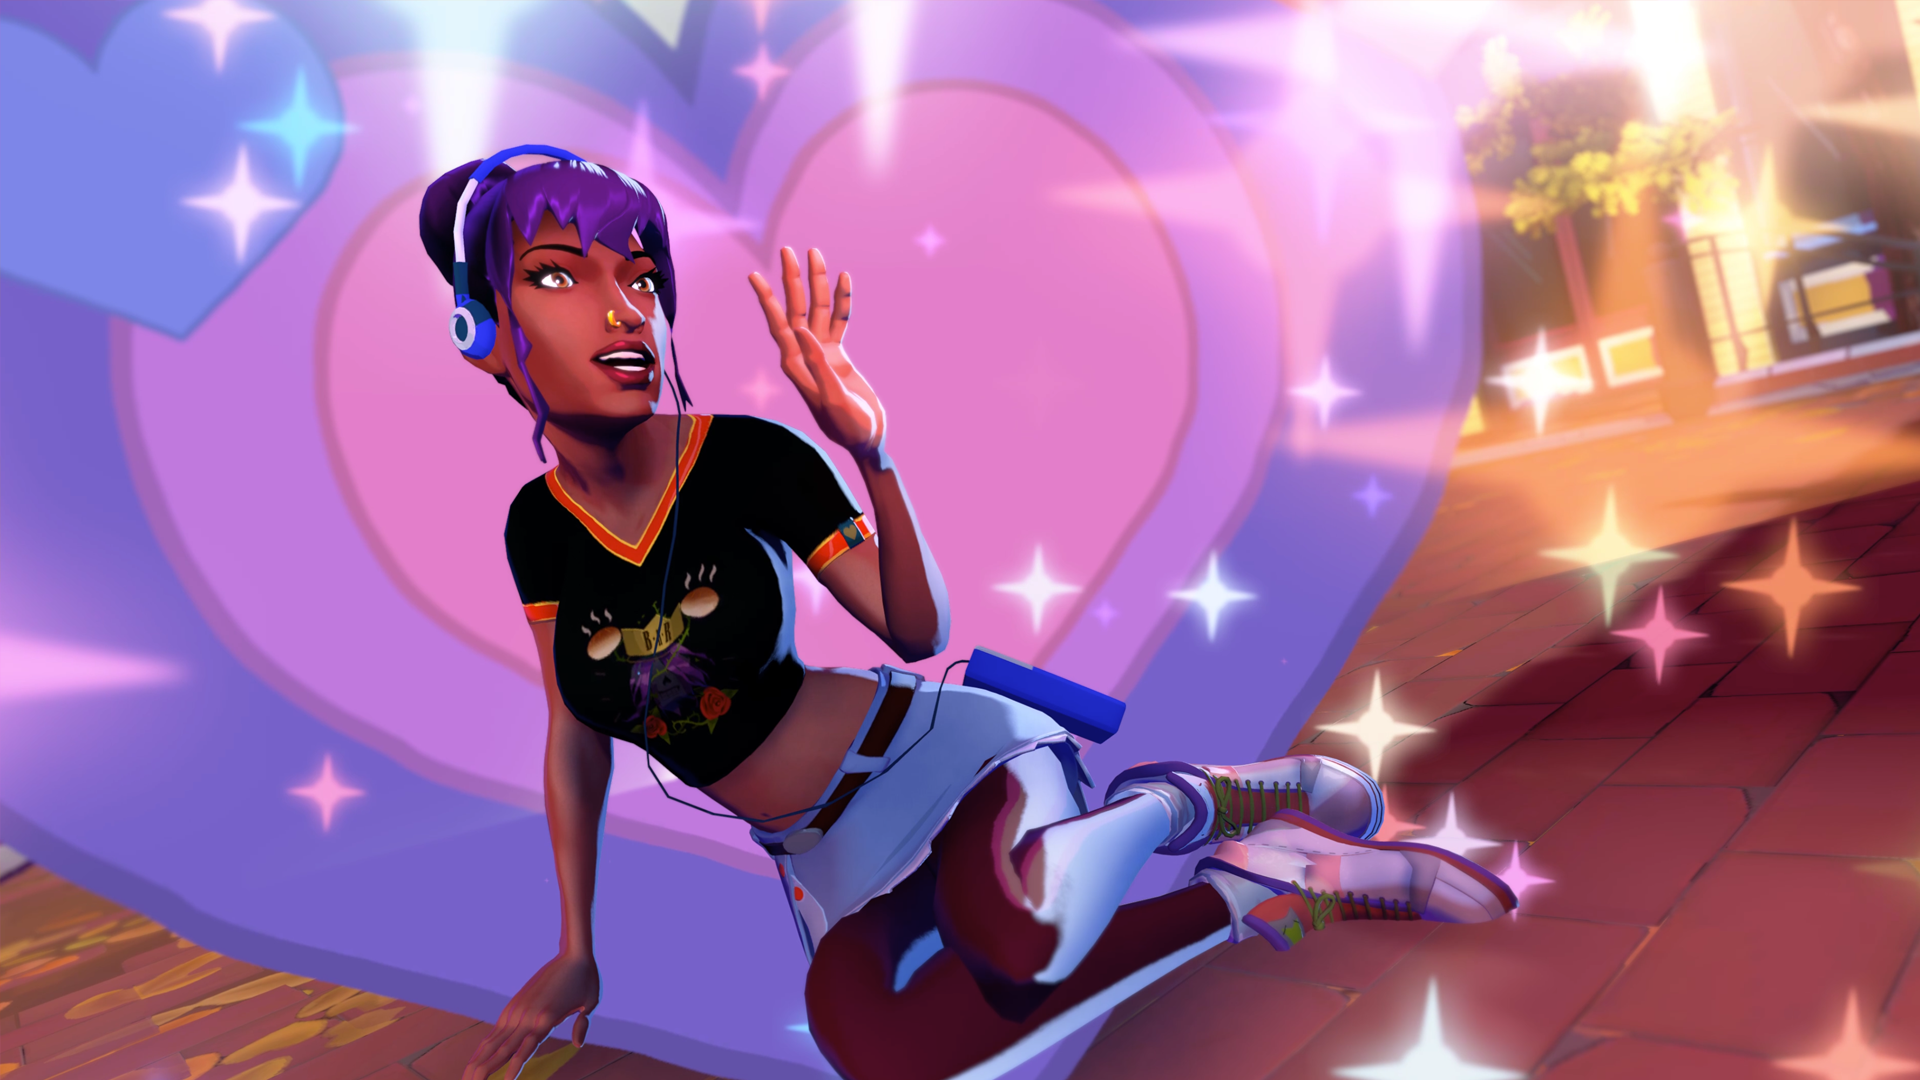 The main character of Thirsty Suitors sits in front of a glowing purple heart.